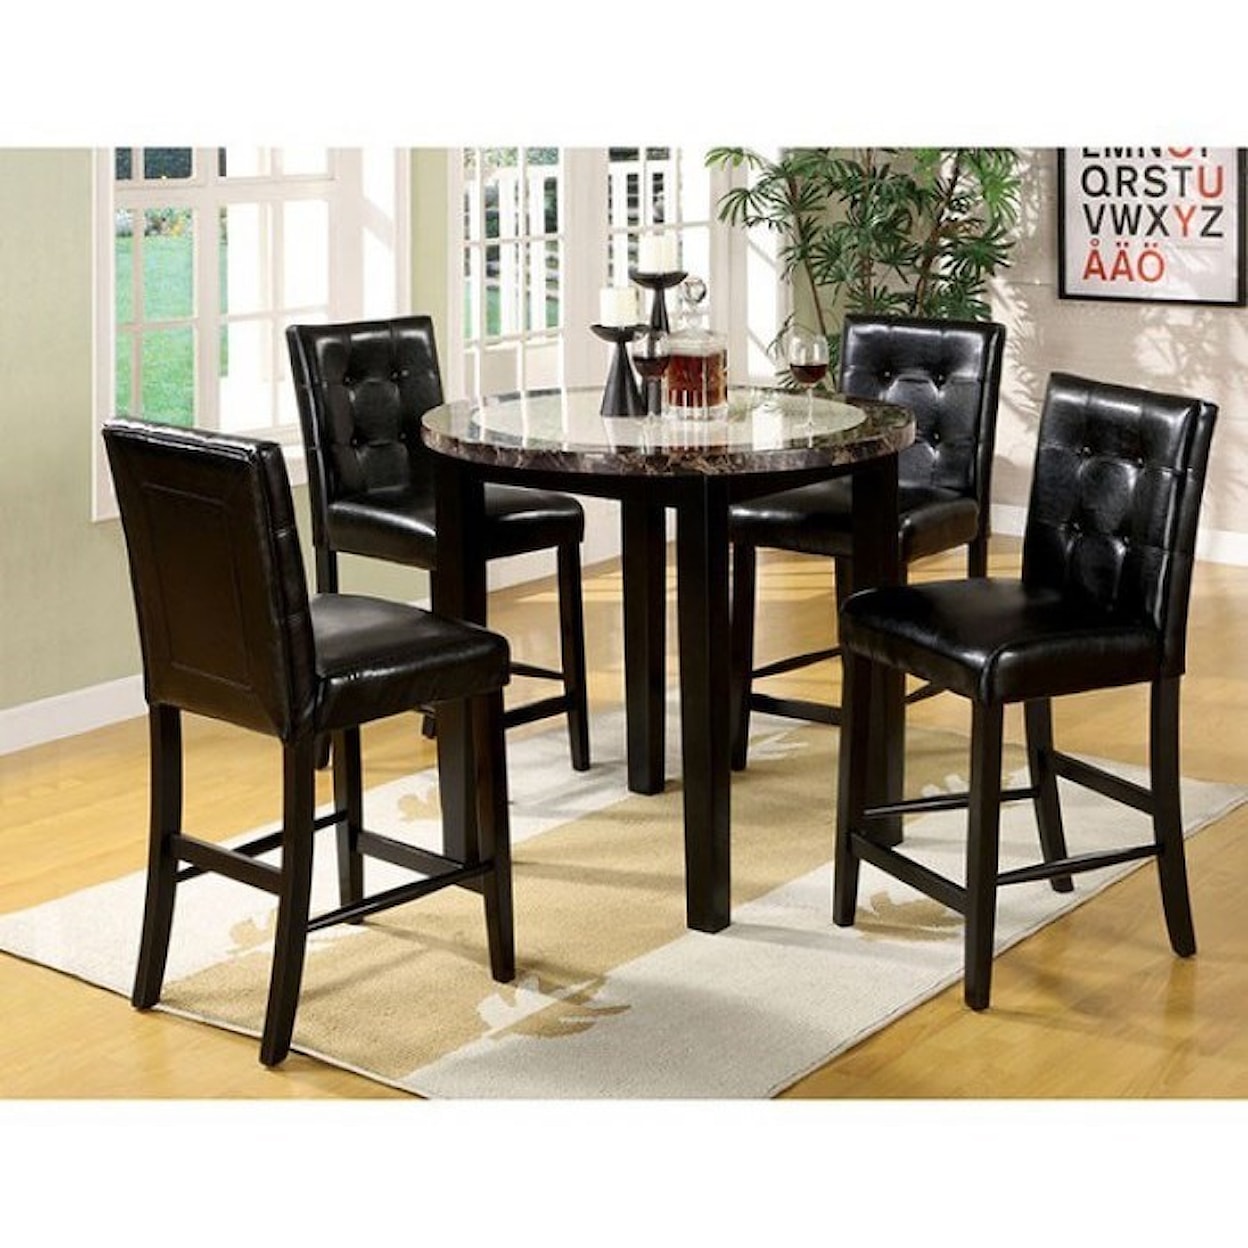 Furniture of America - FOA Atlas IV 5 Piece Counter Height Table and Stool Set